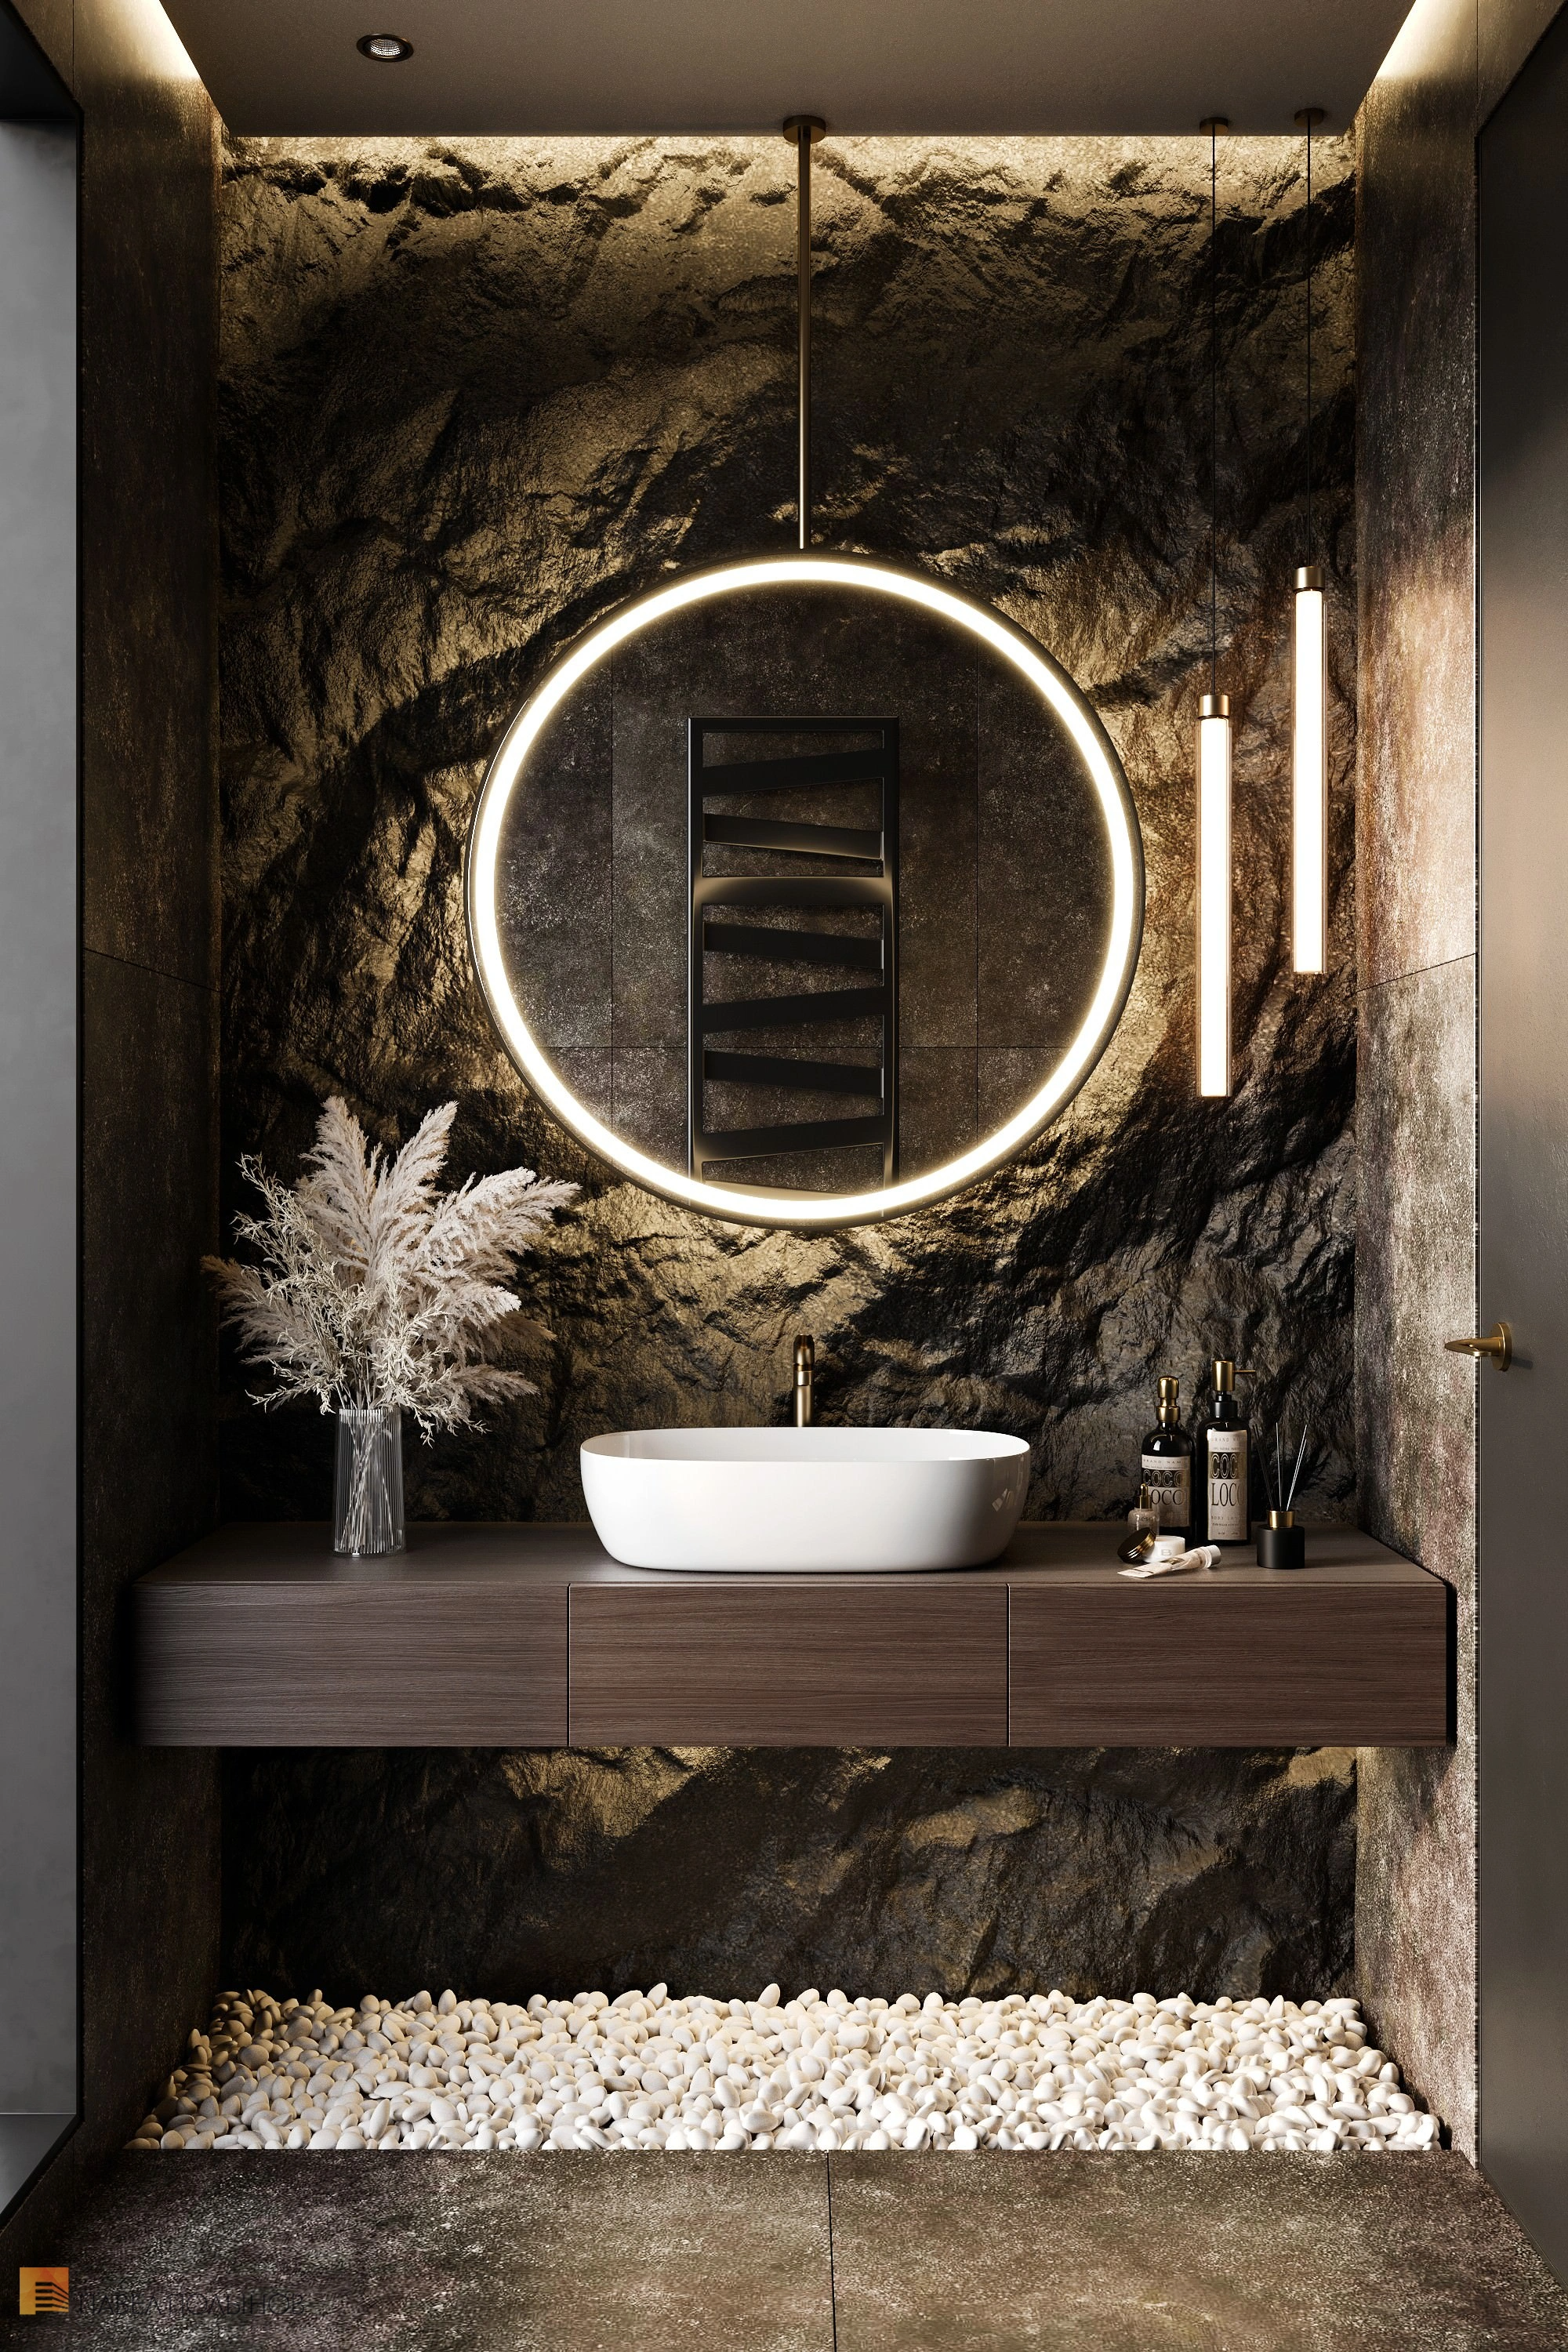 Latest Mirror Designs: Reflecting Style and Sophistication in Your Decor